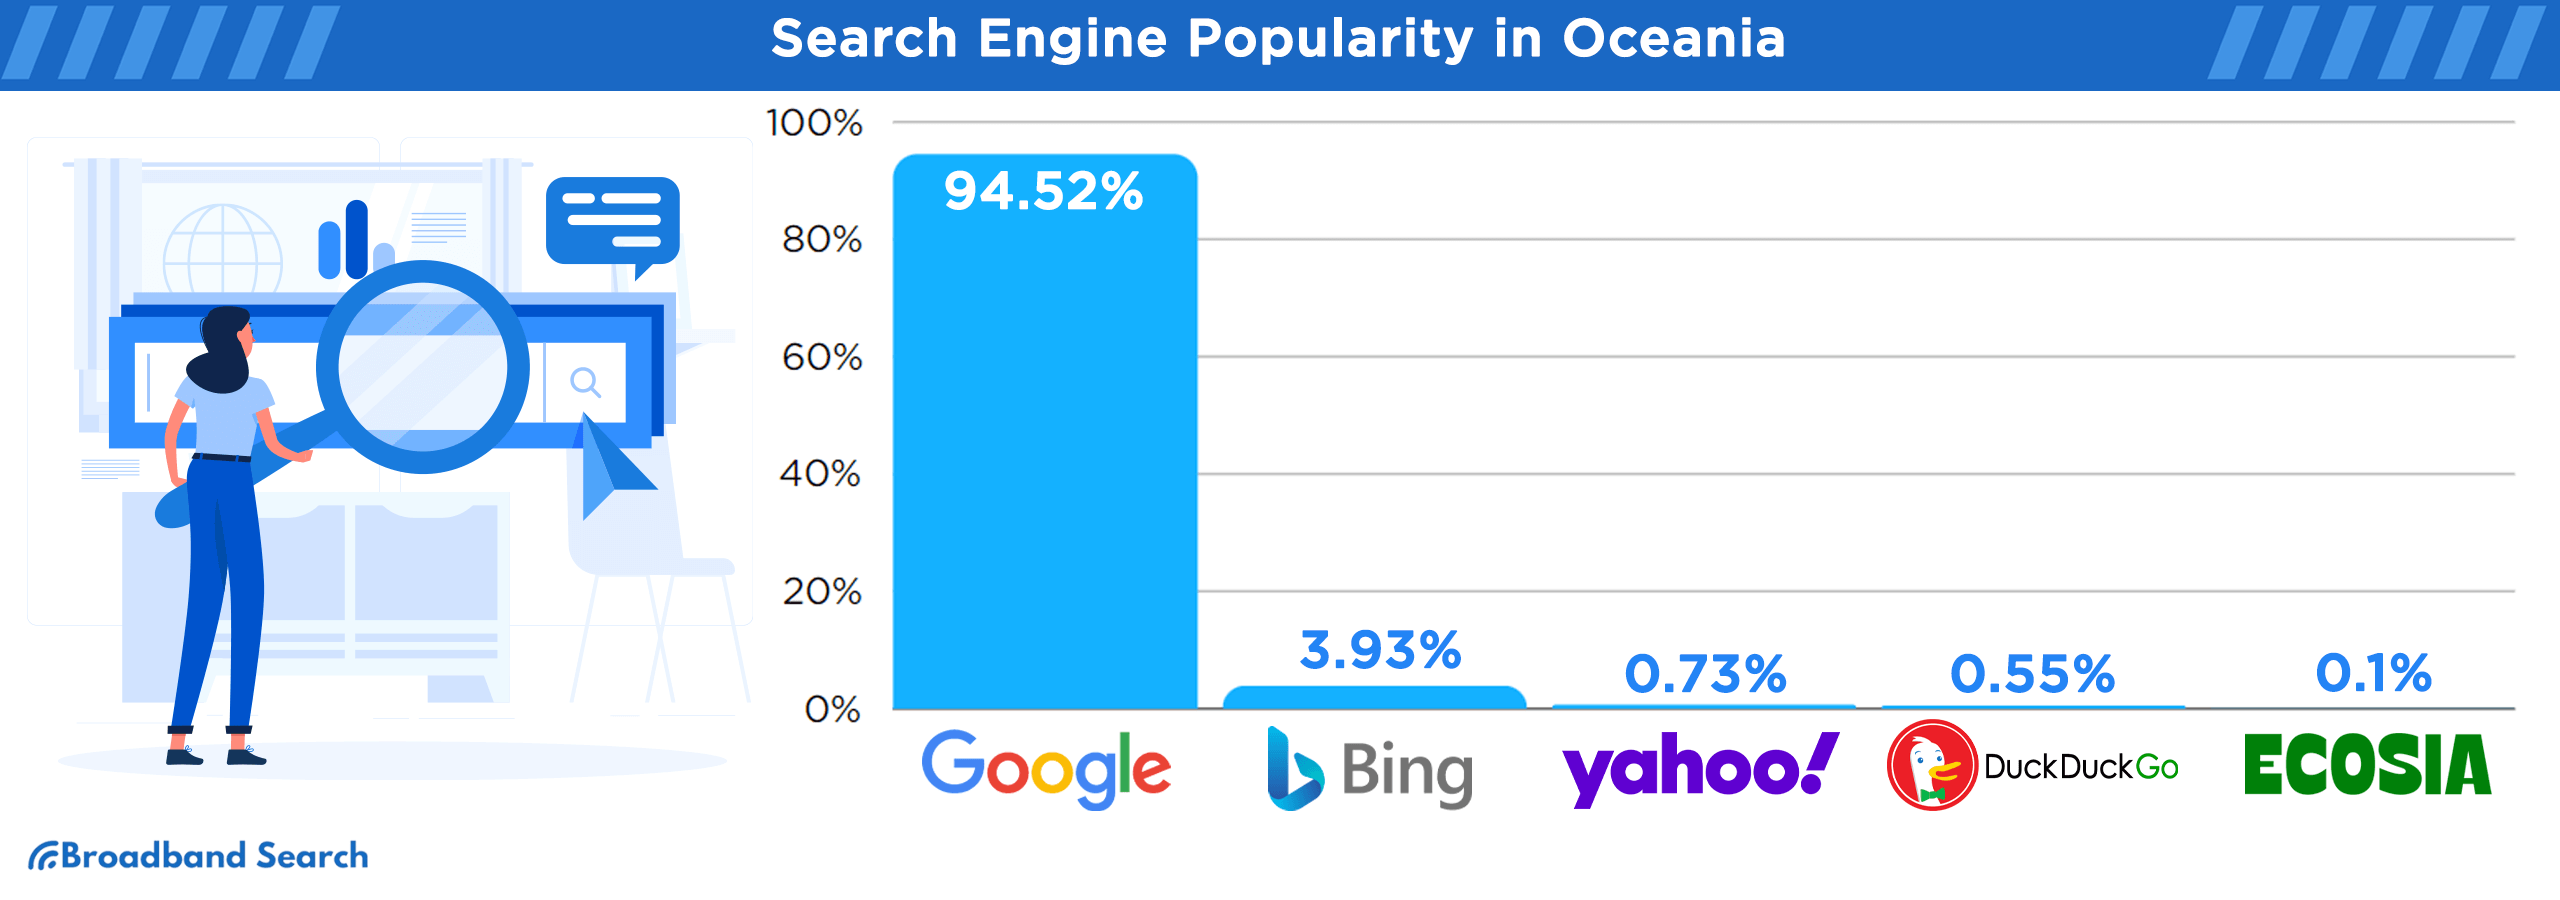 Search engine popularity in Oceania